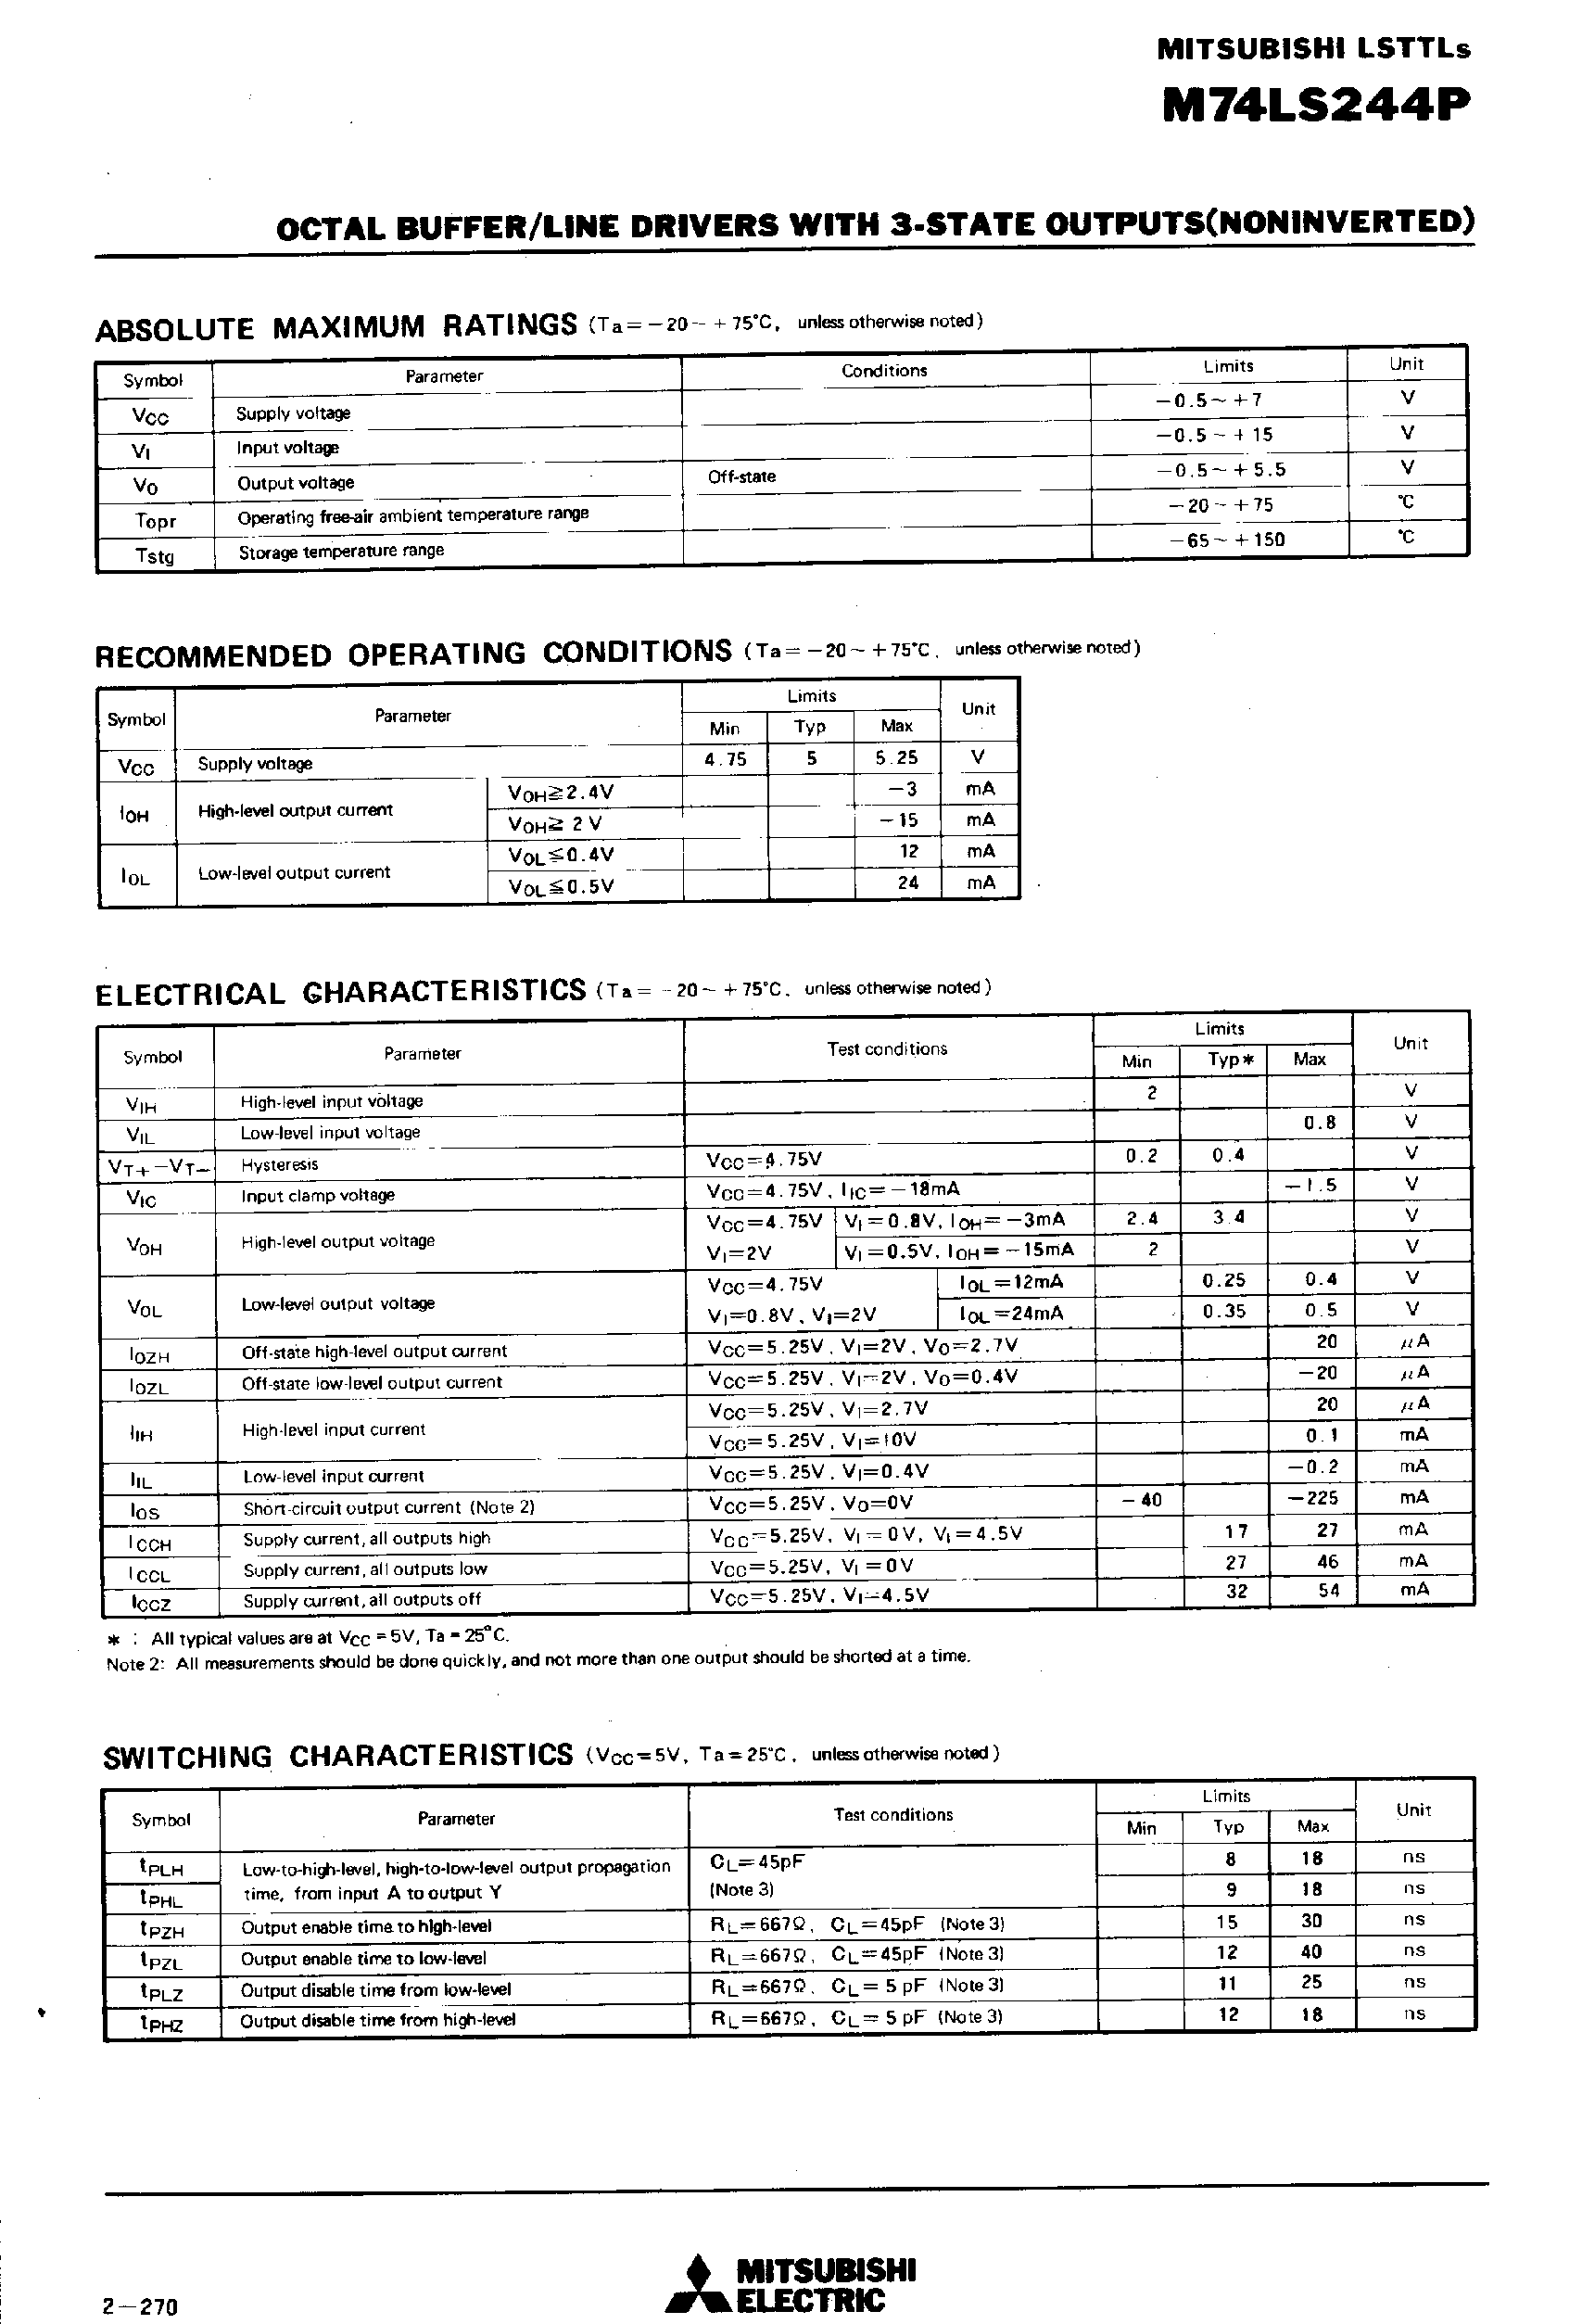 Datasheet M74LS244 - OCTAL BUFFER/LINE DRIVERS WITH 3-STATE OUTPUT(NONINVERTED) page 2